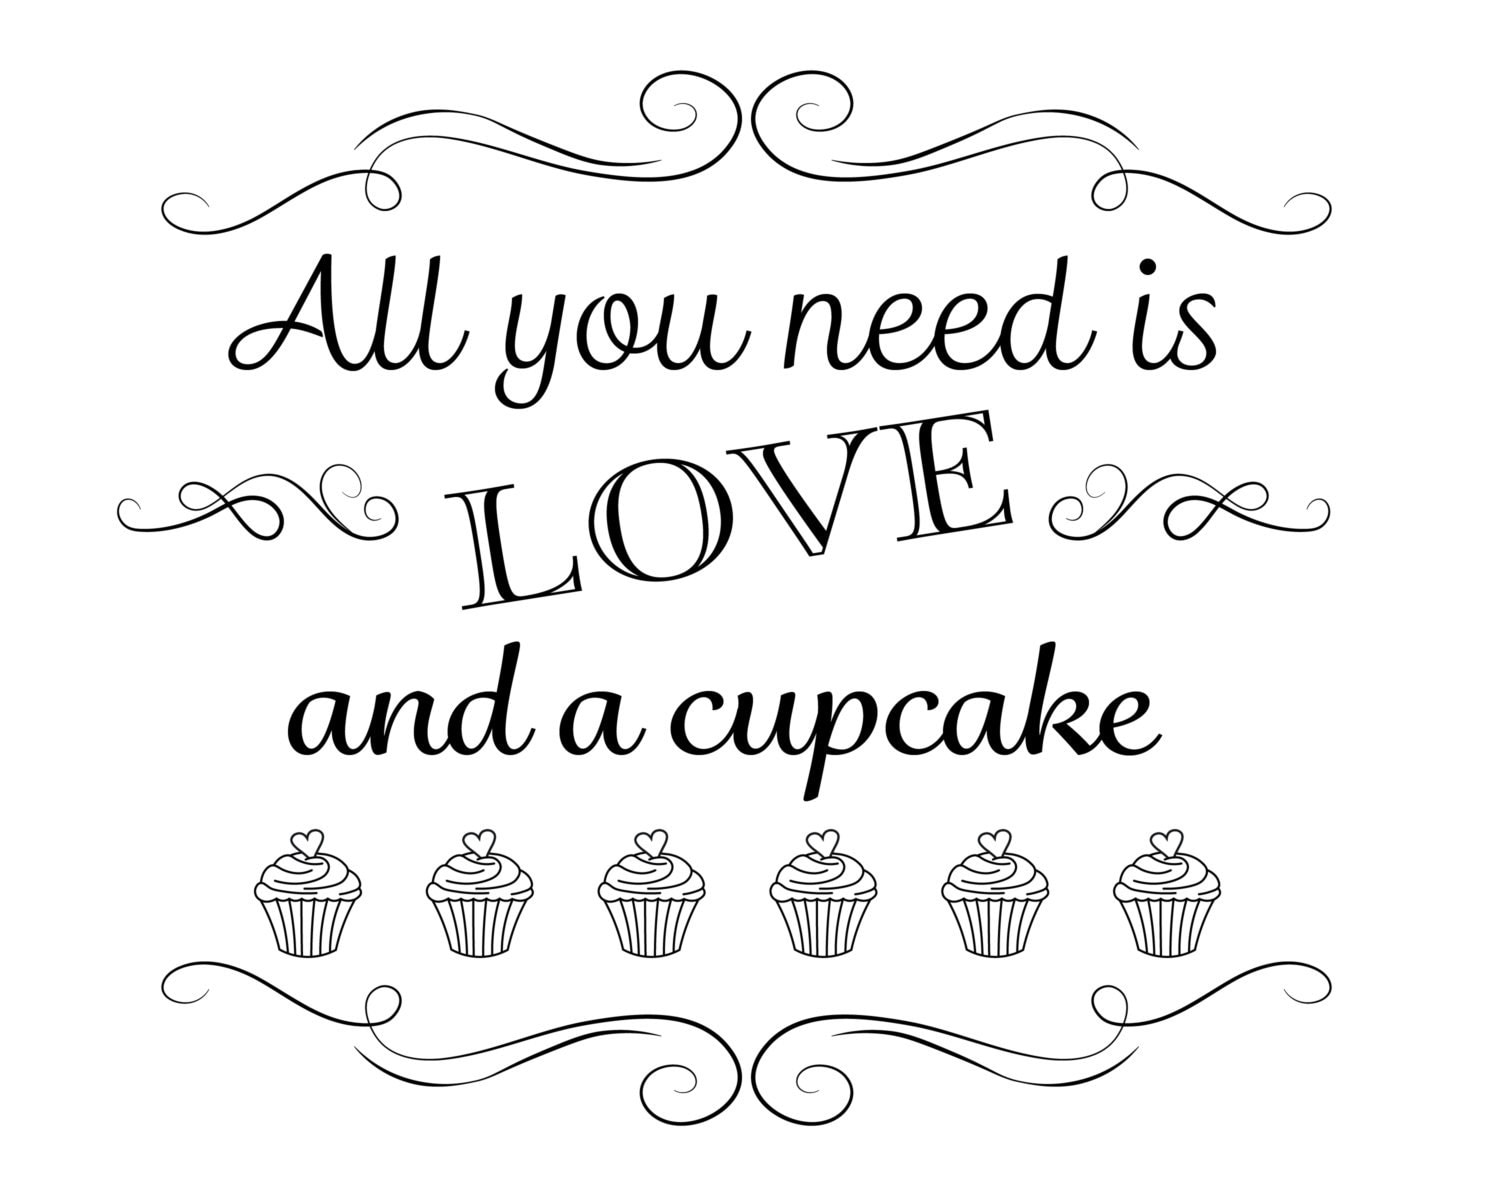 Download Printable Wedding Sign All you need is love and a cupcake